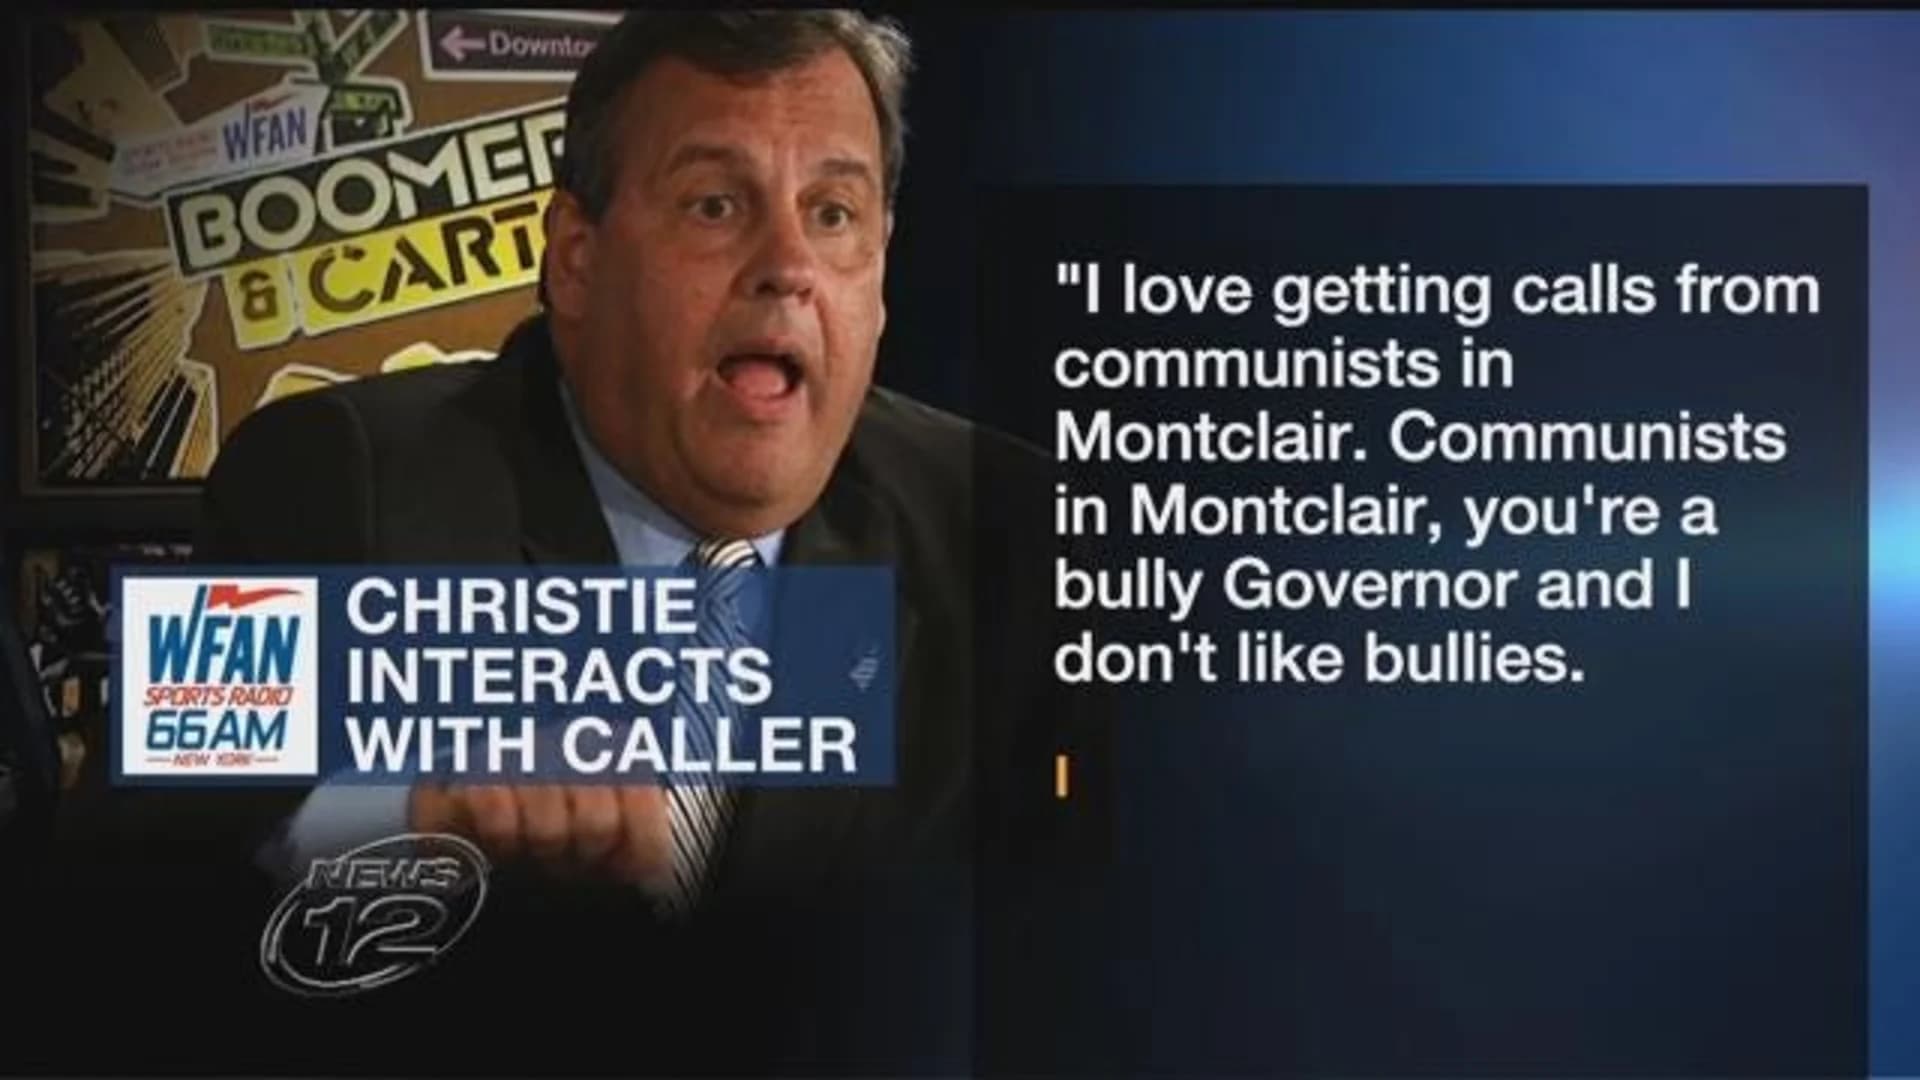 Christie trades barbs with caller on WFAN